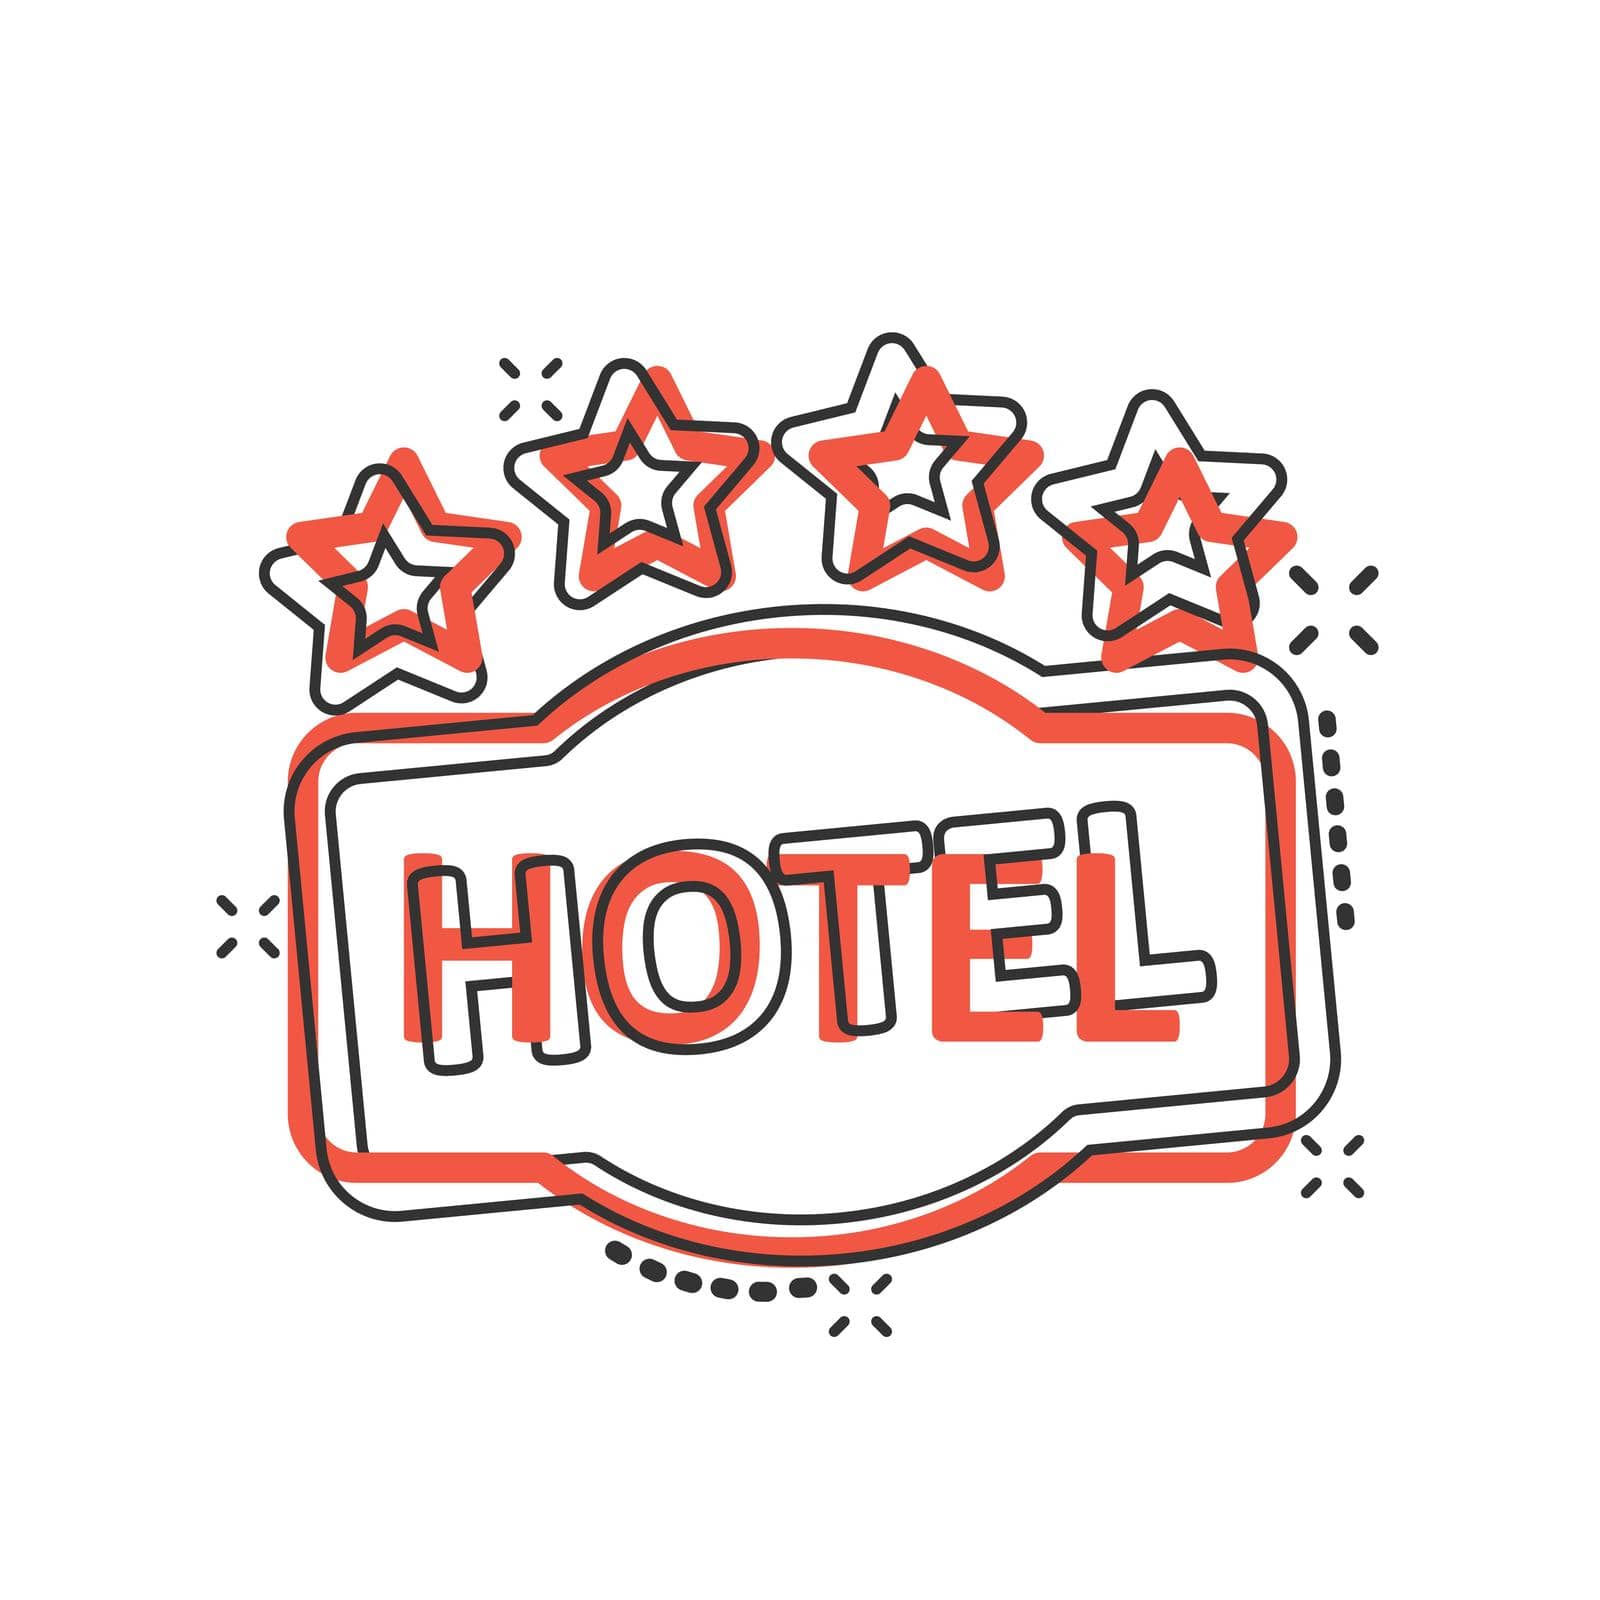 Hotel 4 stars sign icon in comic style. Inn cartoon vector illustration on white isolated background. Hostel room information splash effect business concept. by LysenkoA